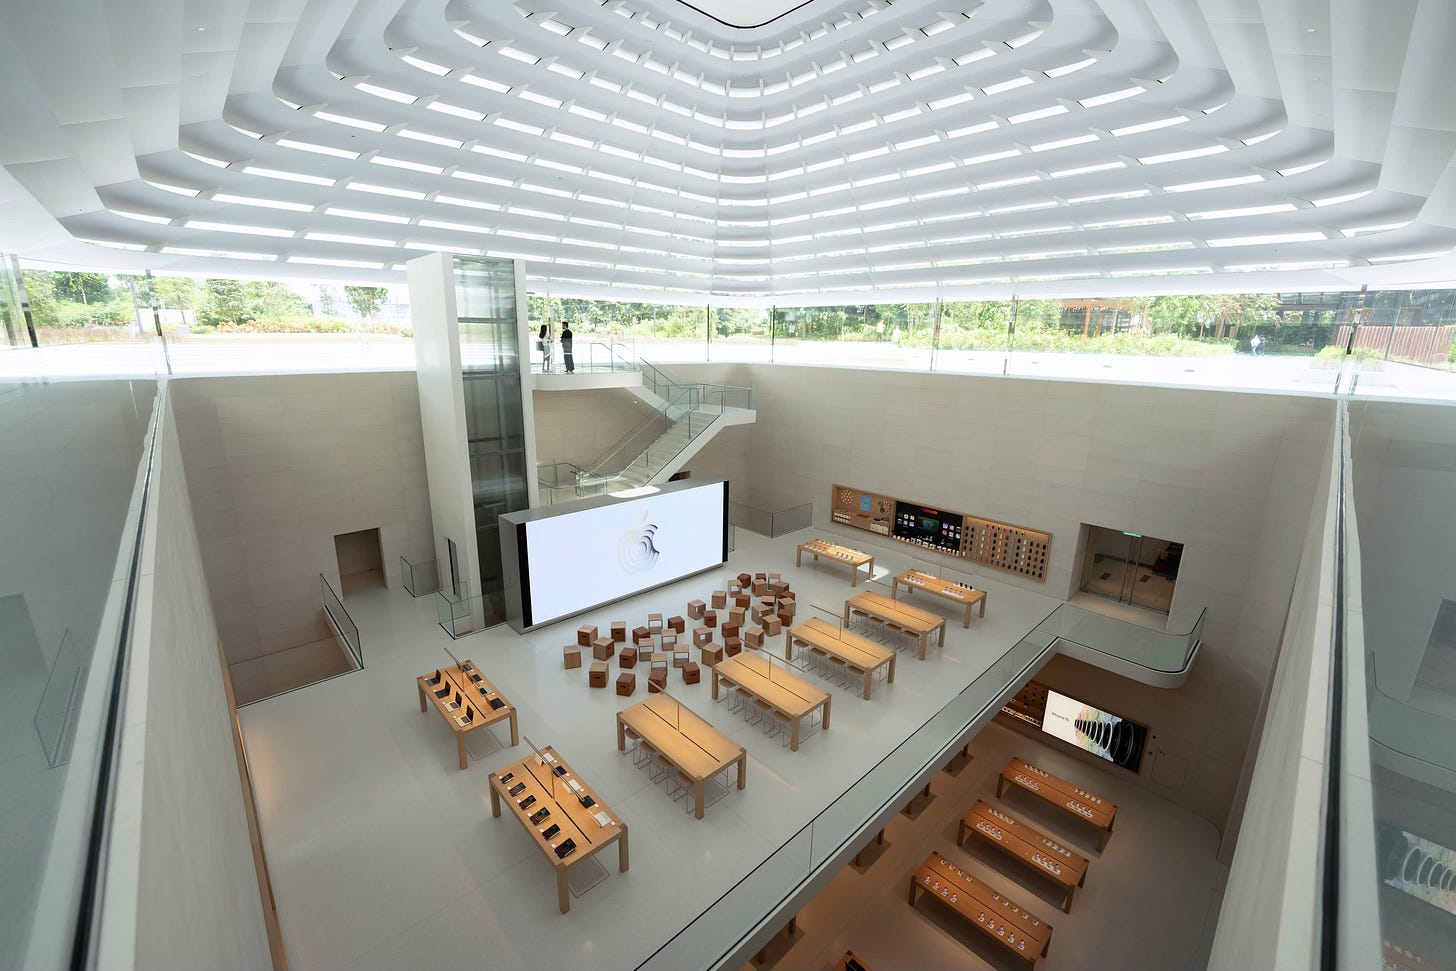 The interior of Apple The Exchange TRX viewed from the canopy looking down. The Forum is arranged on level 2, and tables appear at the edge of the frame on level 1.